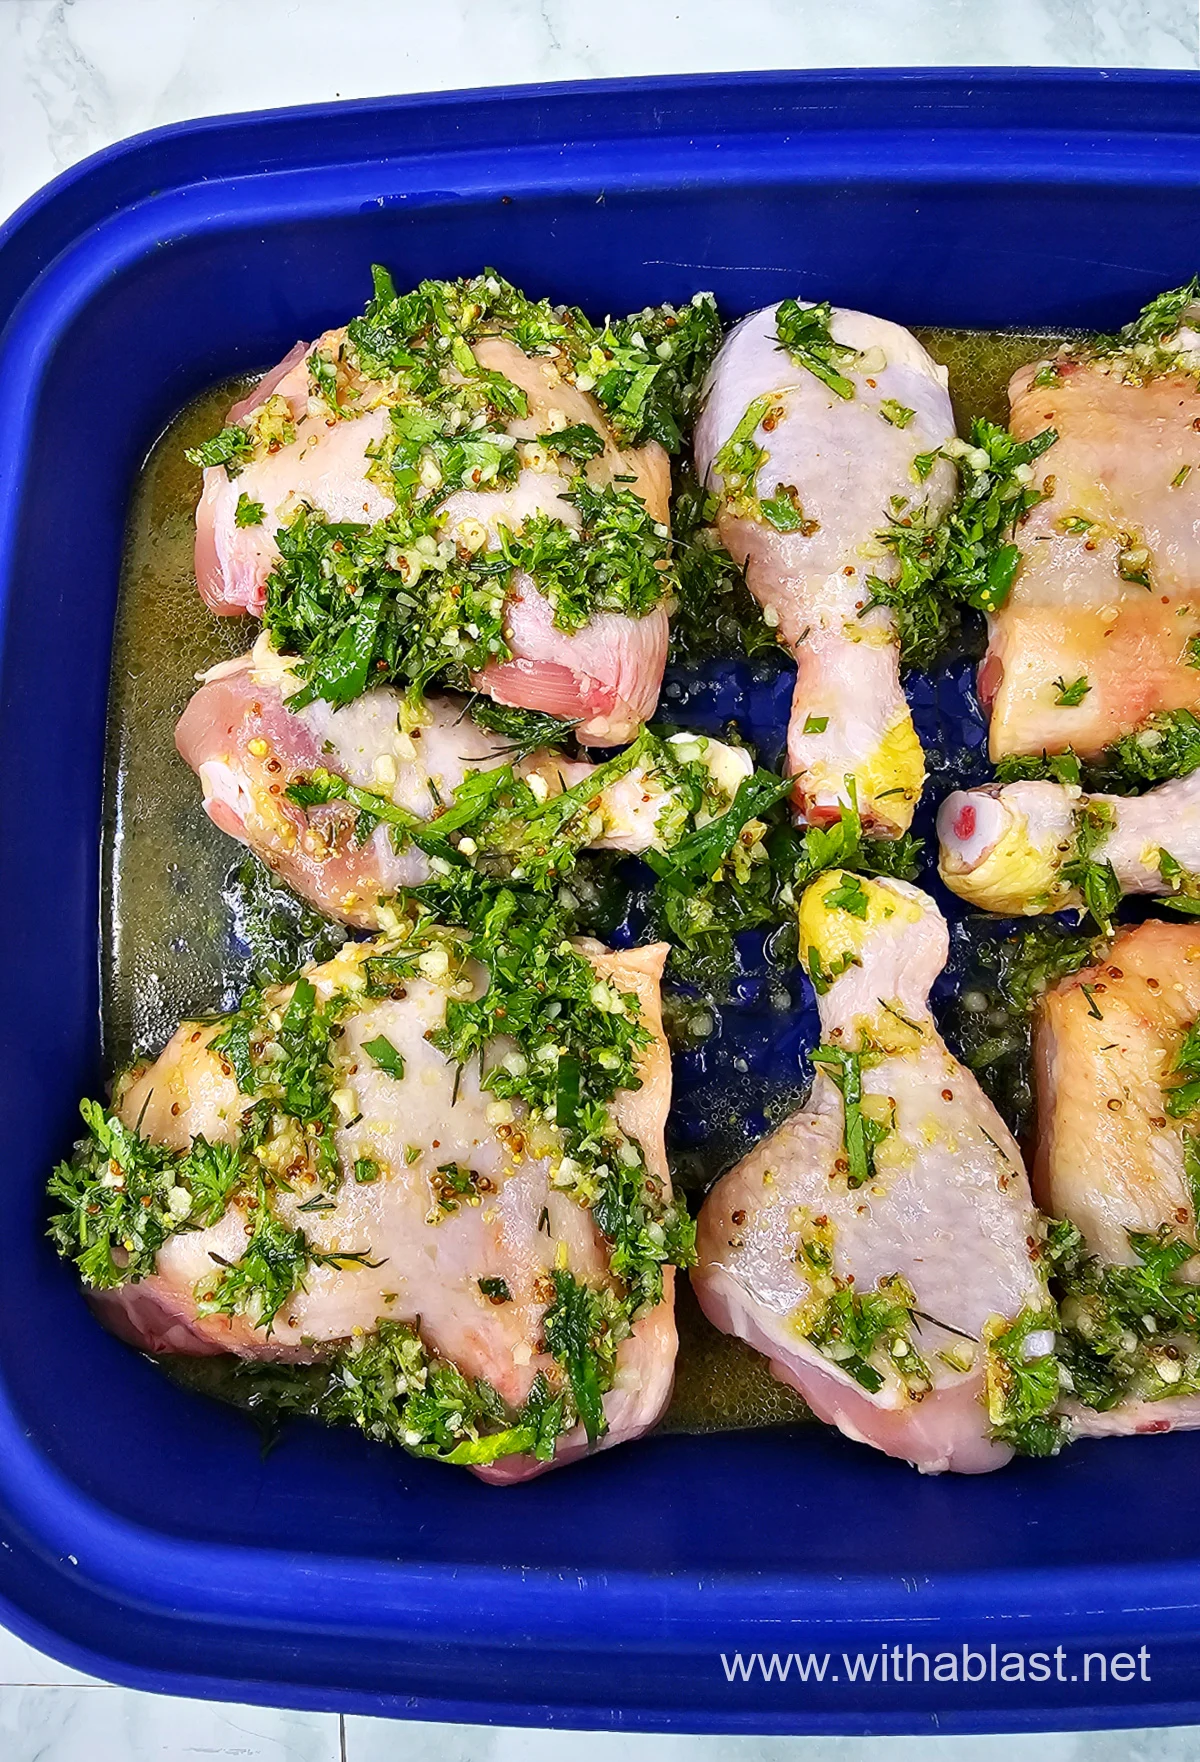 Lemon and Herb Marinade for Chicken